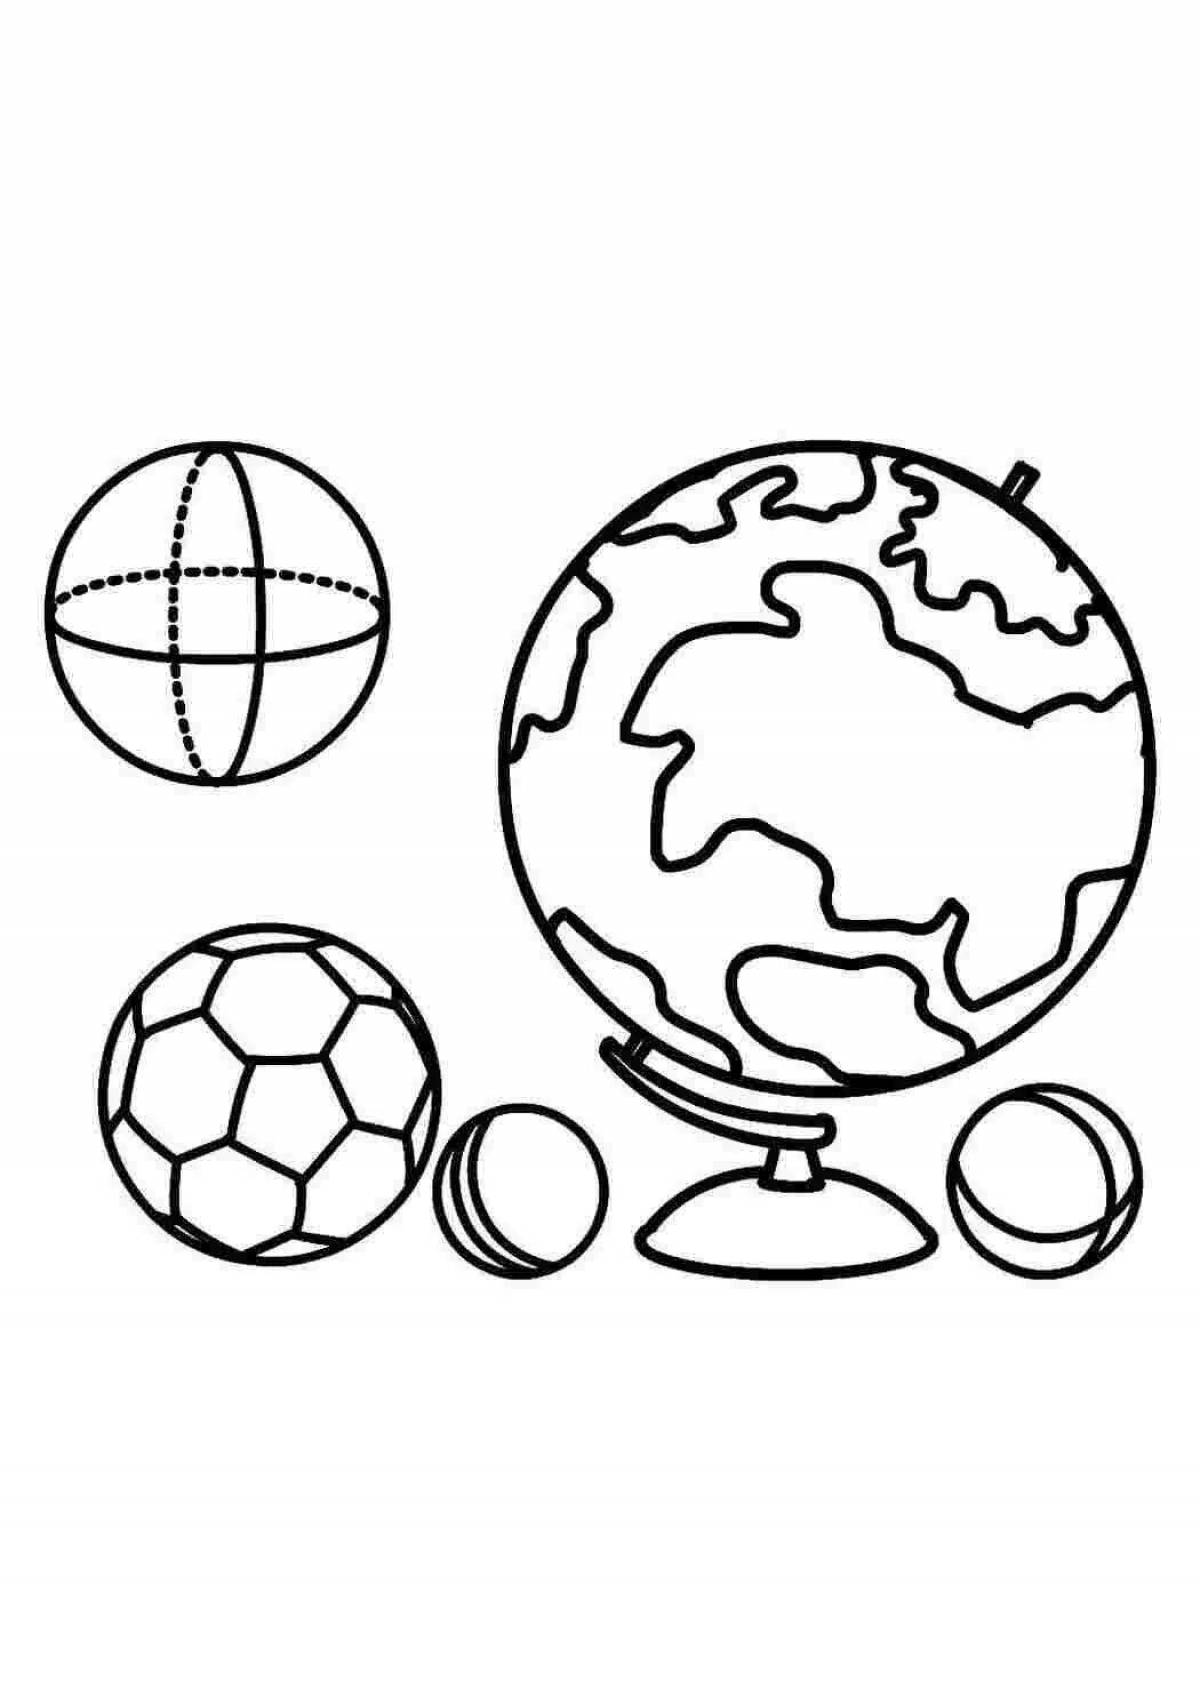 Creative globe coloring book for kids